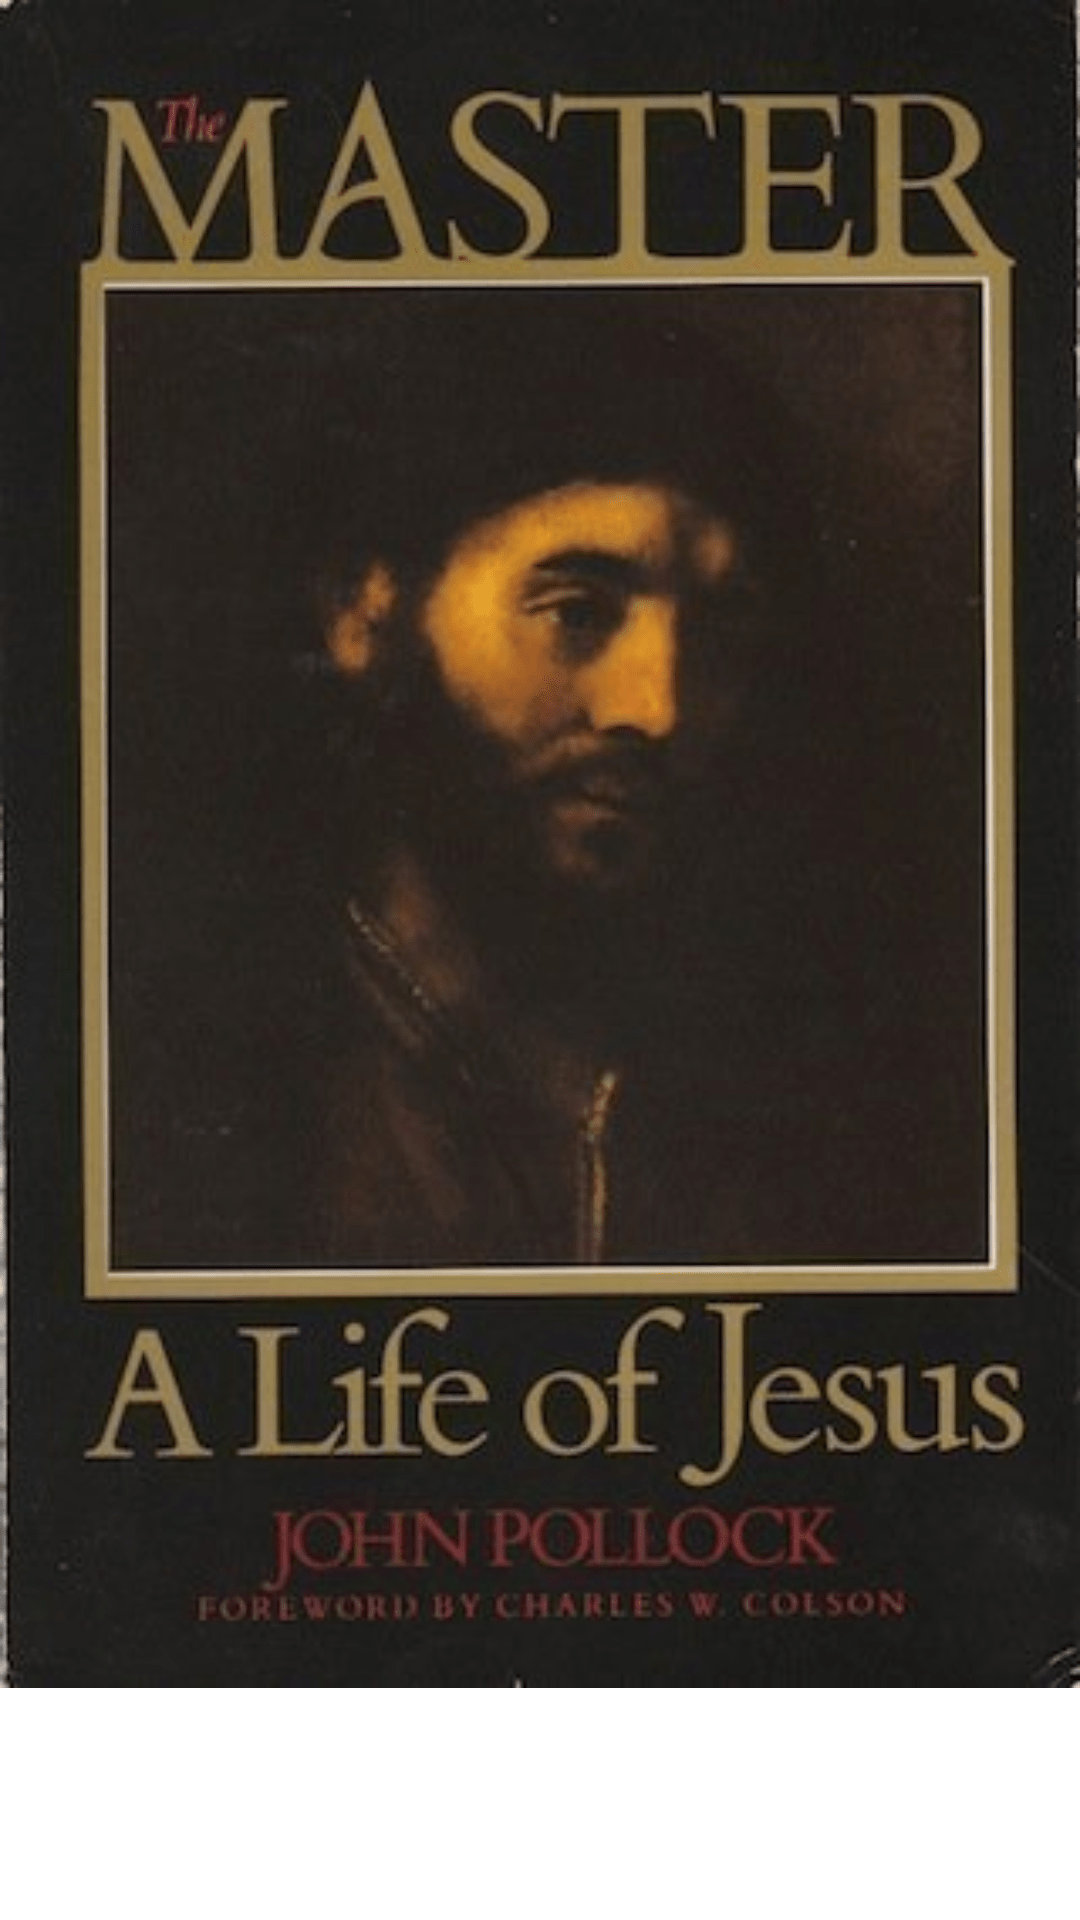 The Master: A life of Jesus